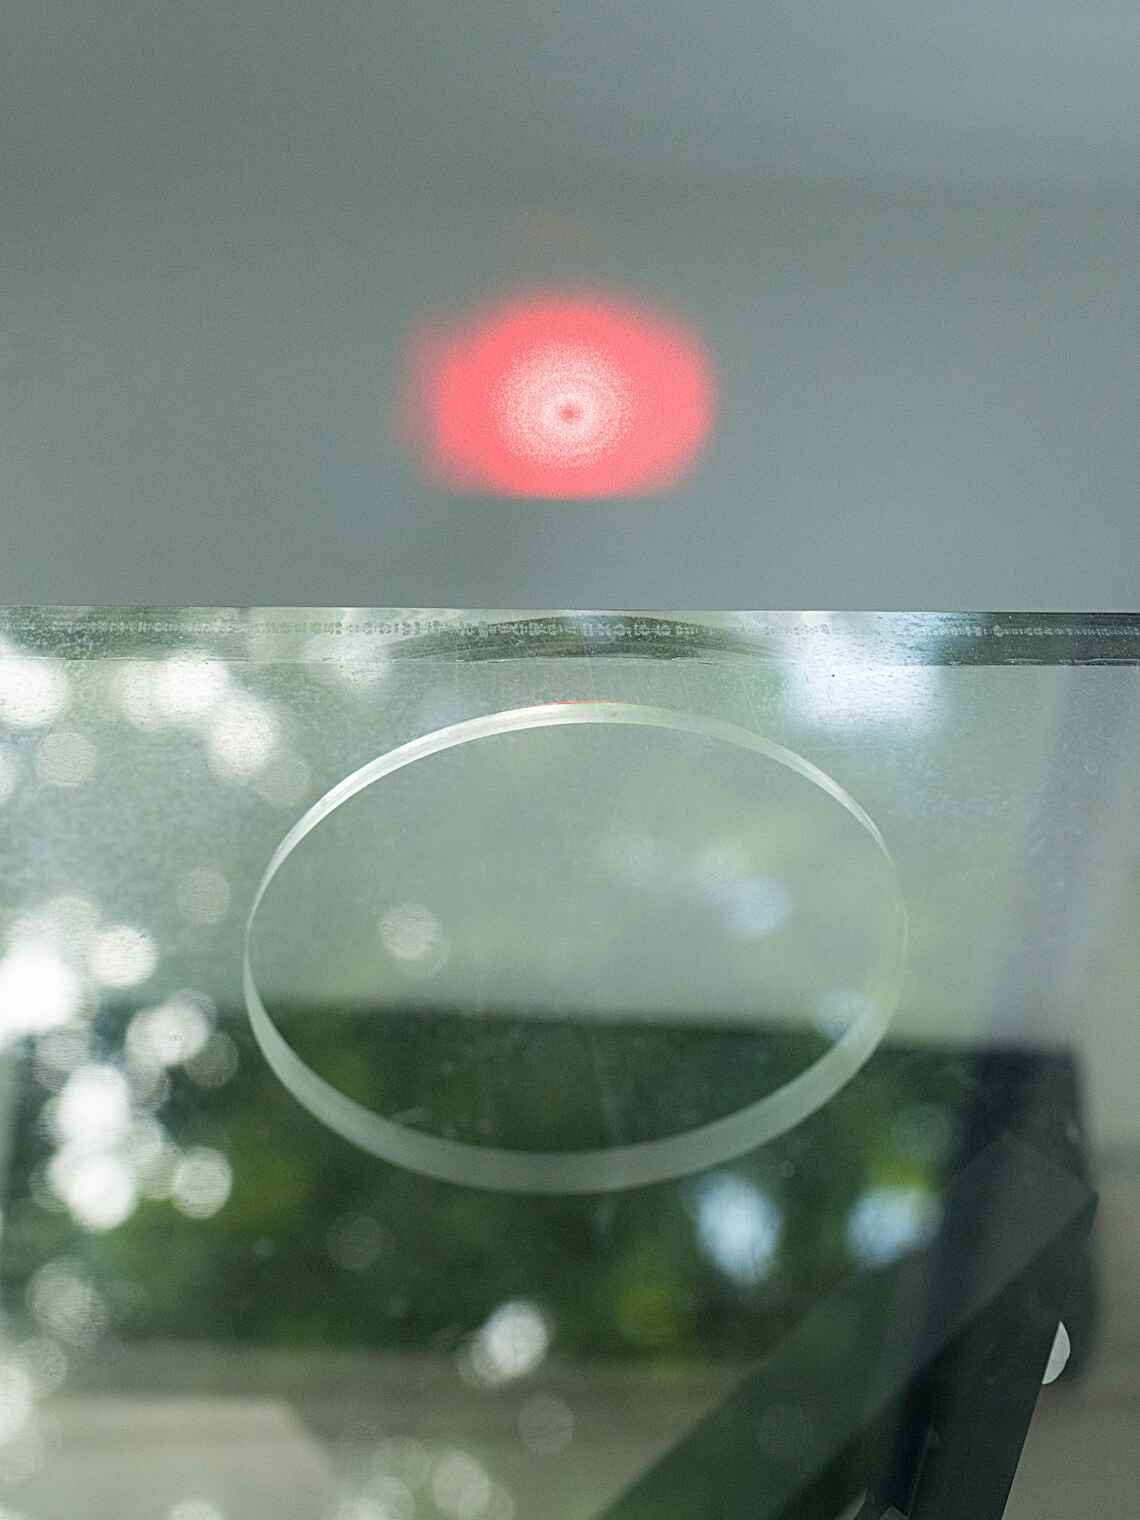 The laser beam of the GEO600 interferometer. At the bottom is an observation port in the dust cover.